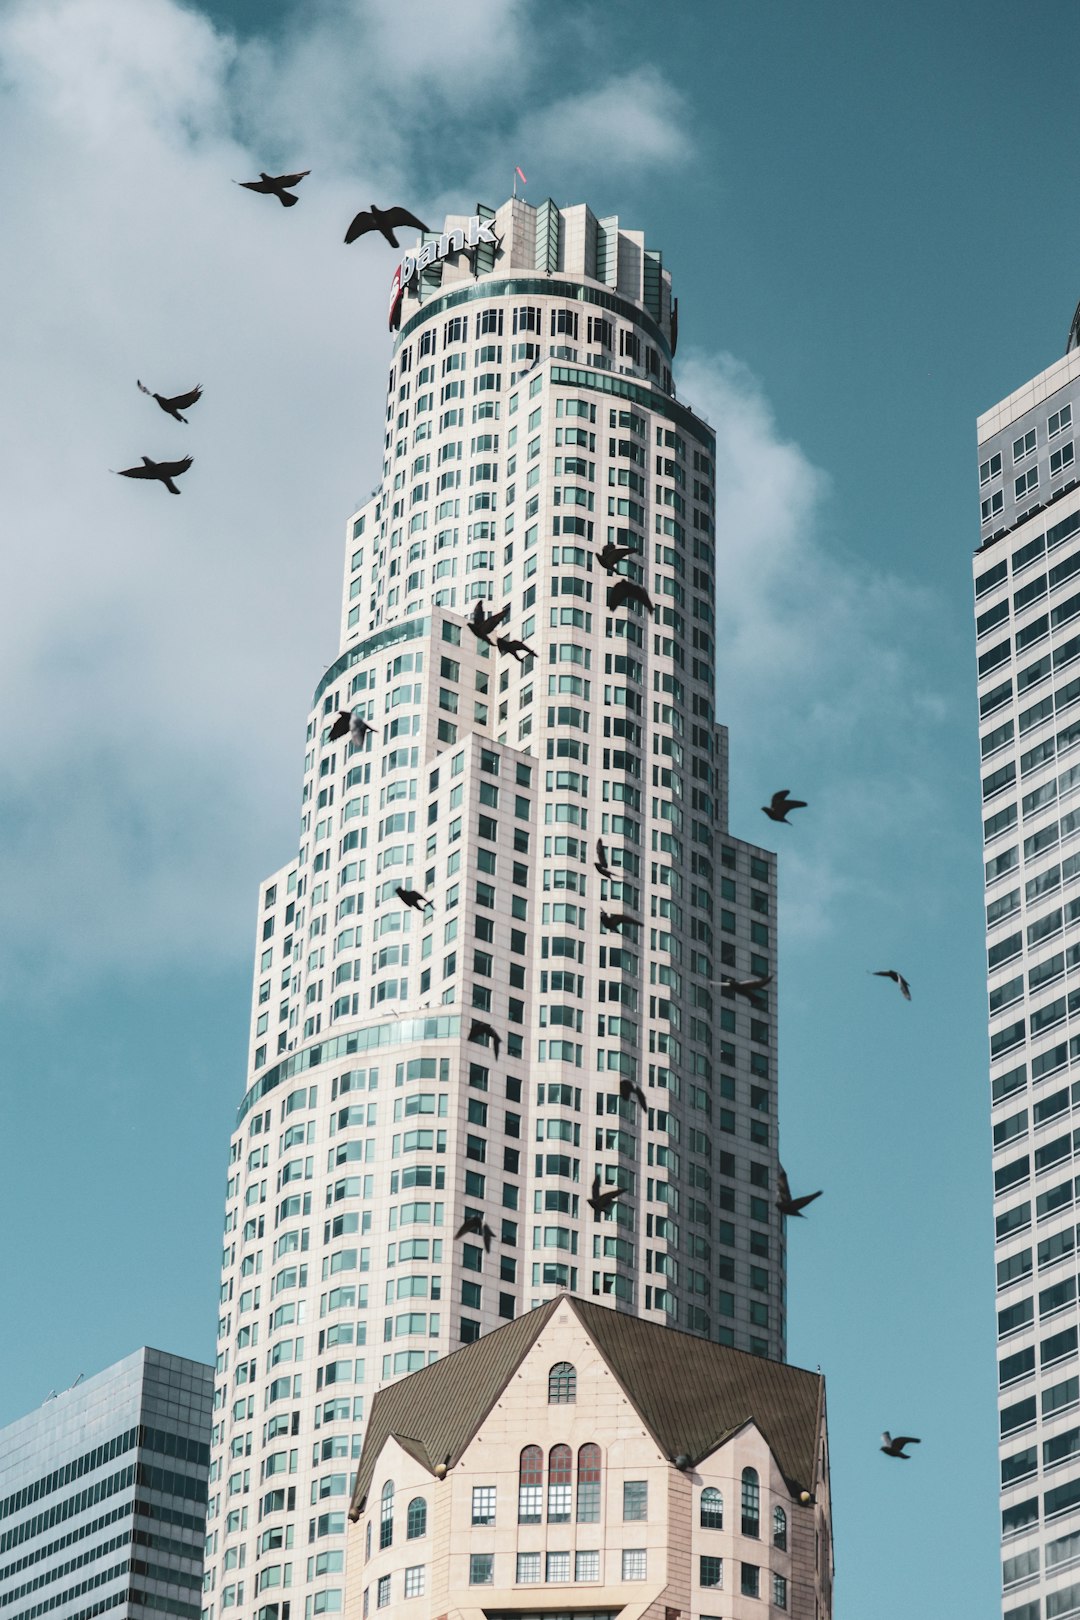 low angle photography of three birds flying over high rise building during daytime